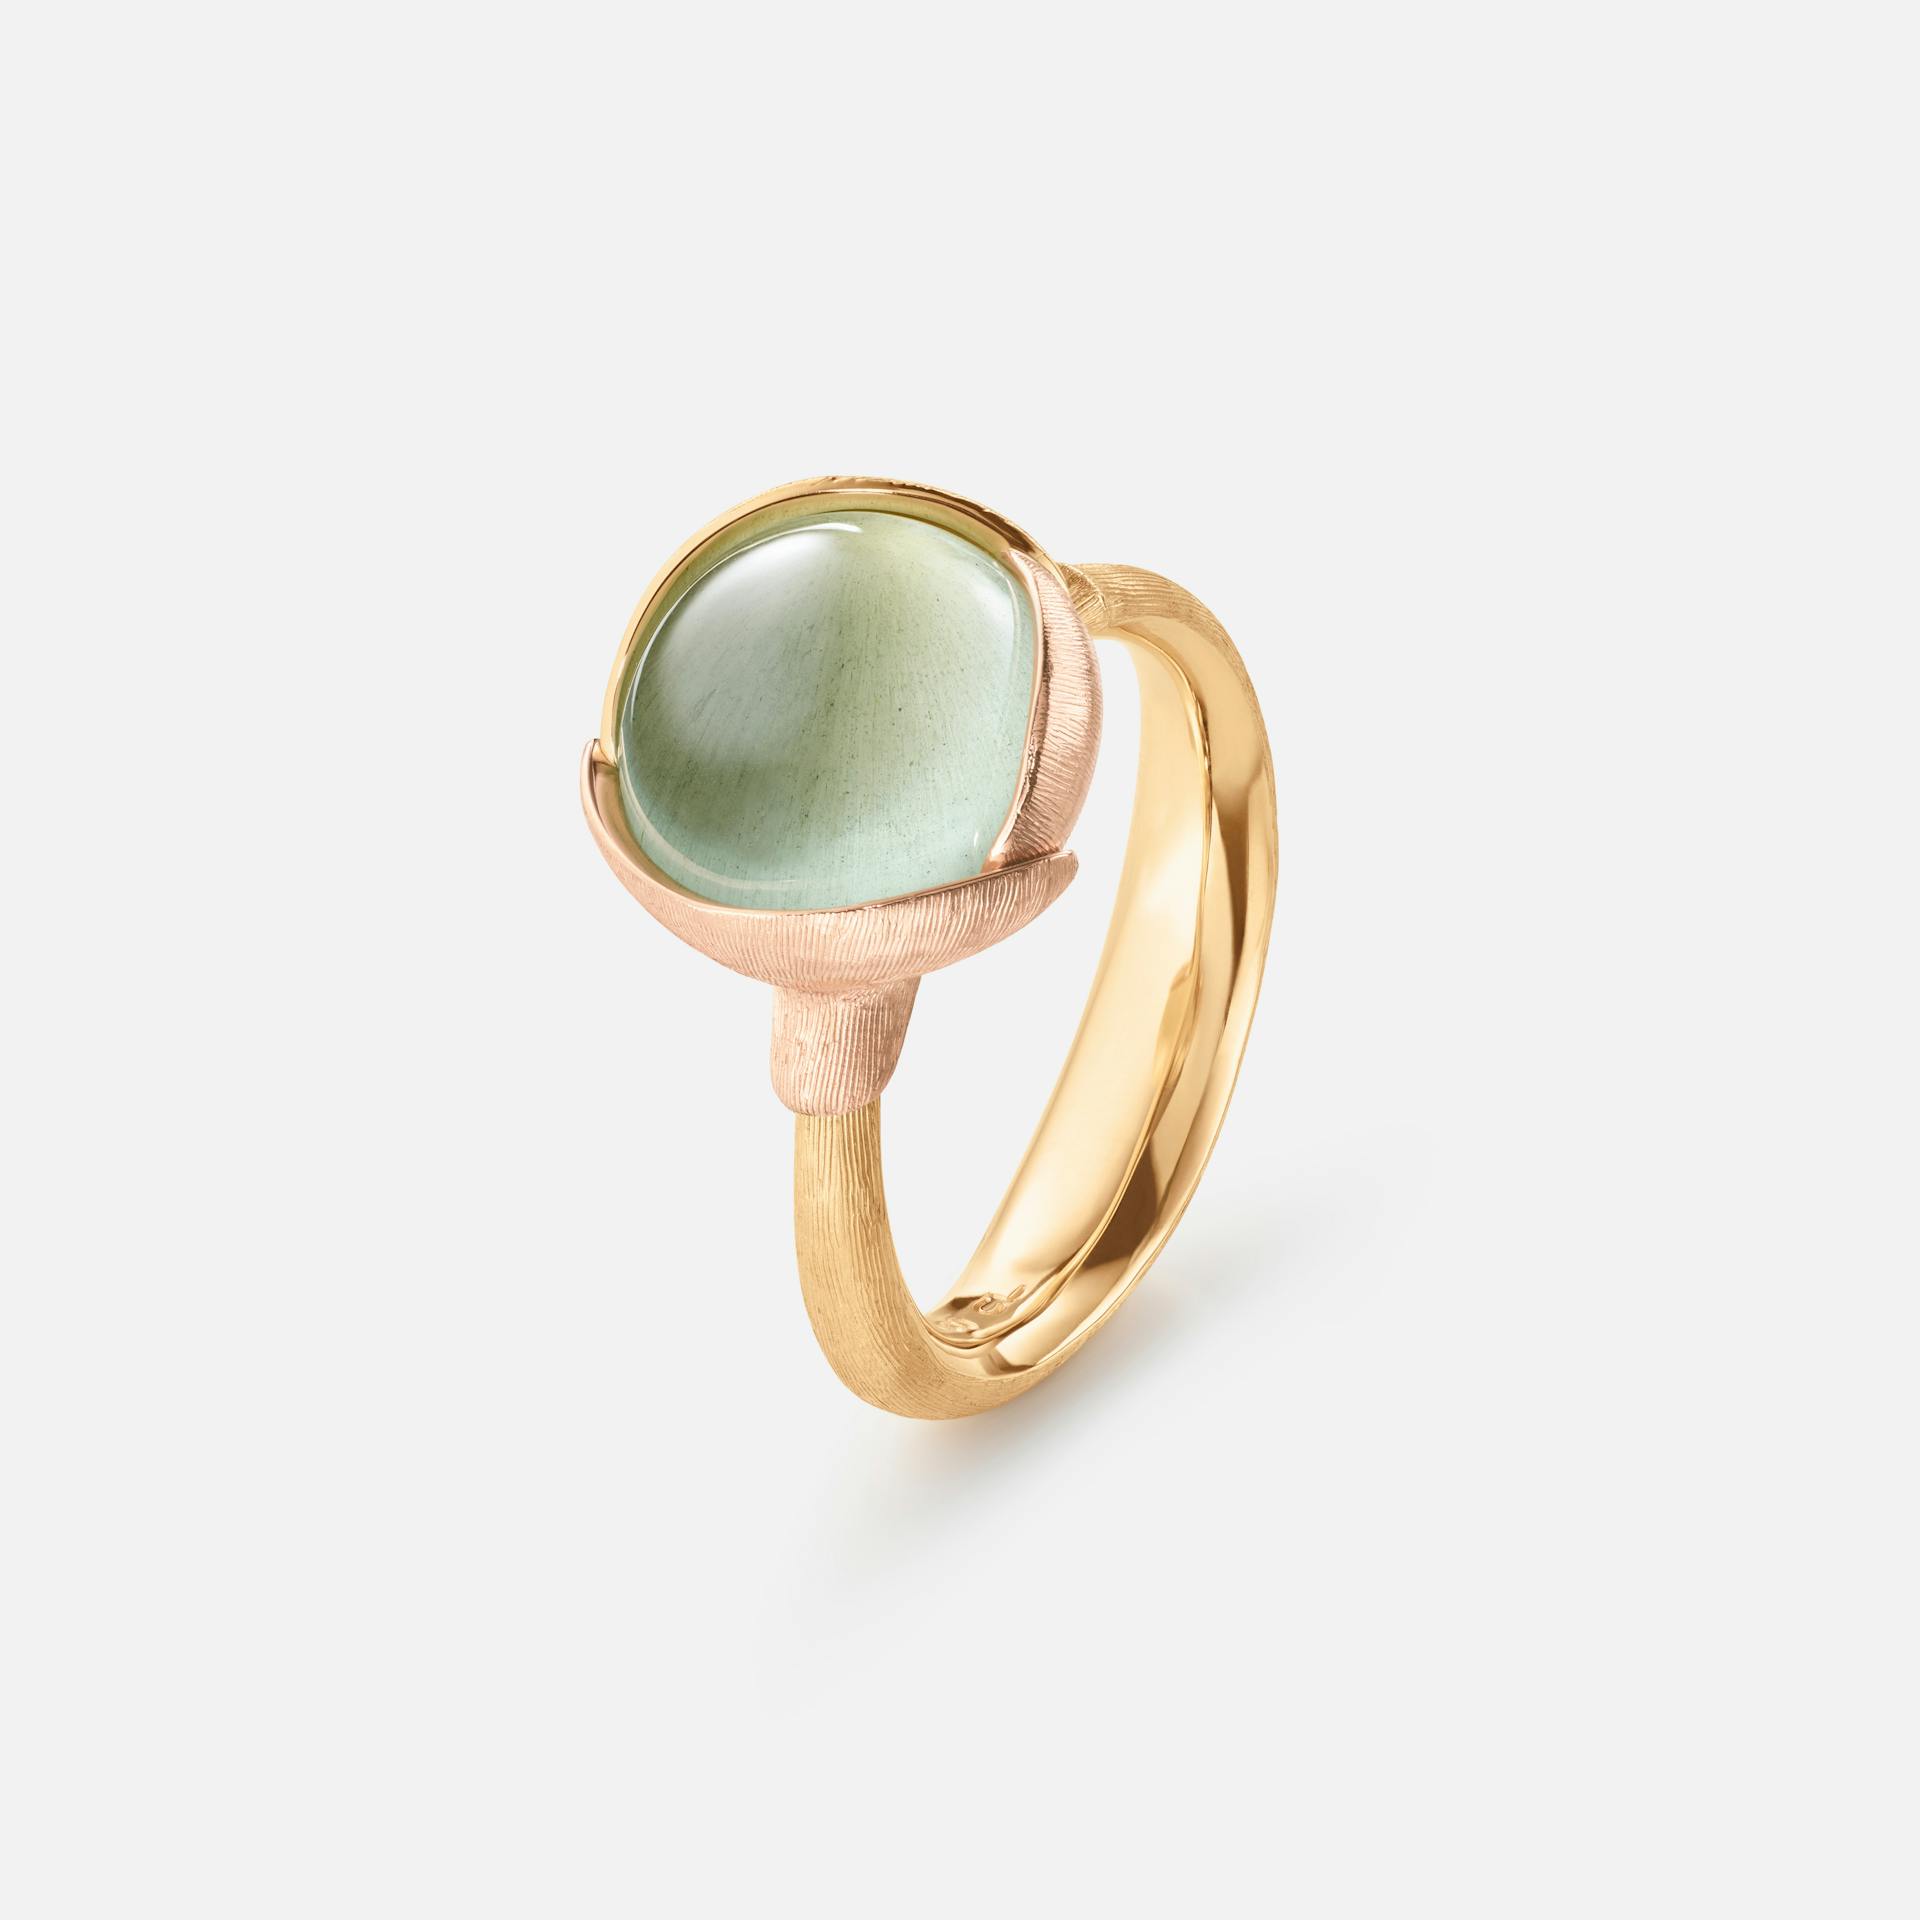 Lotus Ring size 2 in Yellow and Rose Gold  with Aquamarine  |  Ole Lynggaard Copenhagen